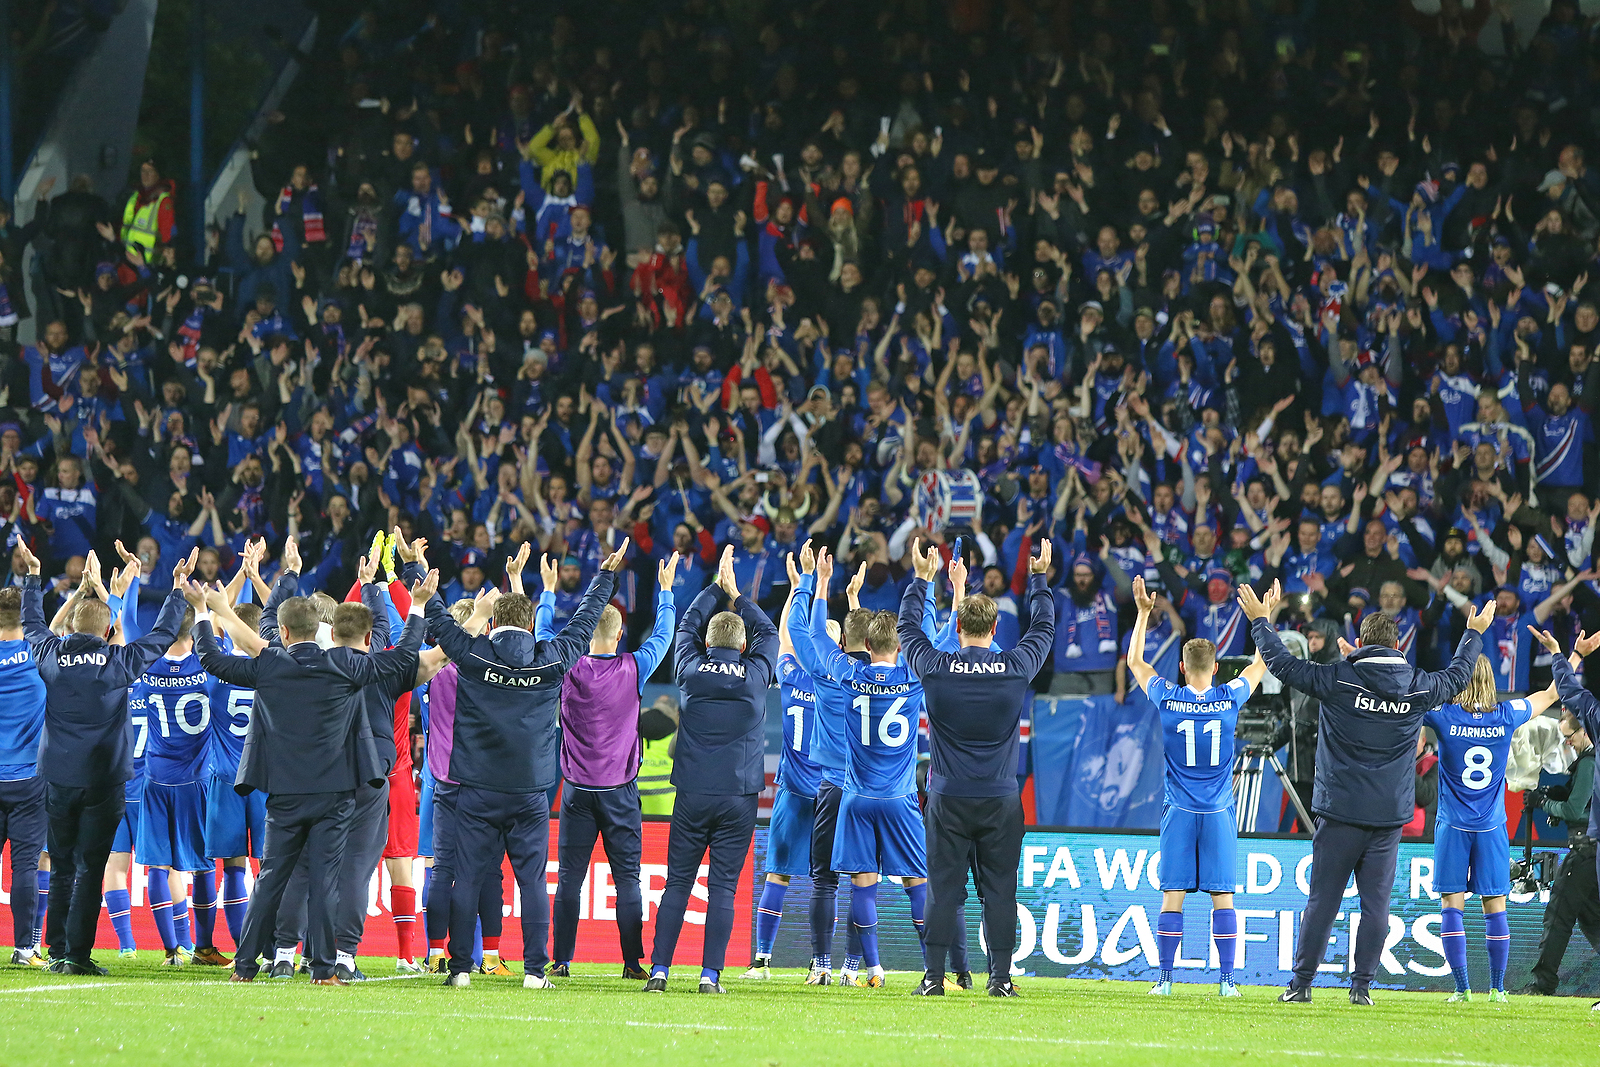 Players of the Iceland National football team thank fans after the FIFA World Cup 2018 qualifying game against Ukraine.